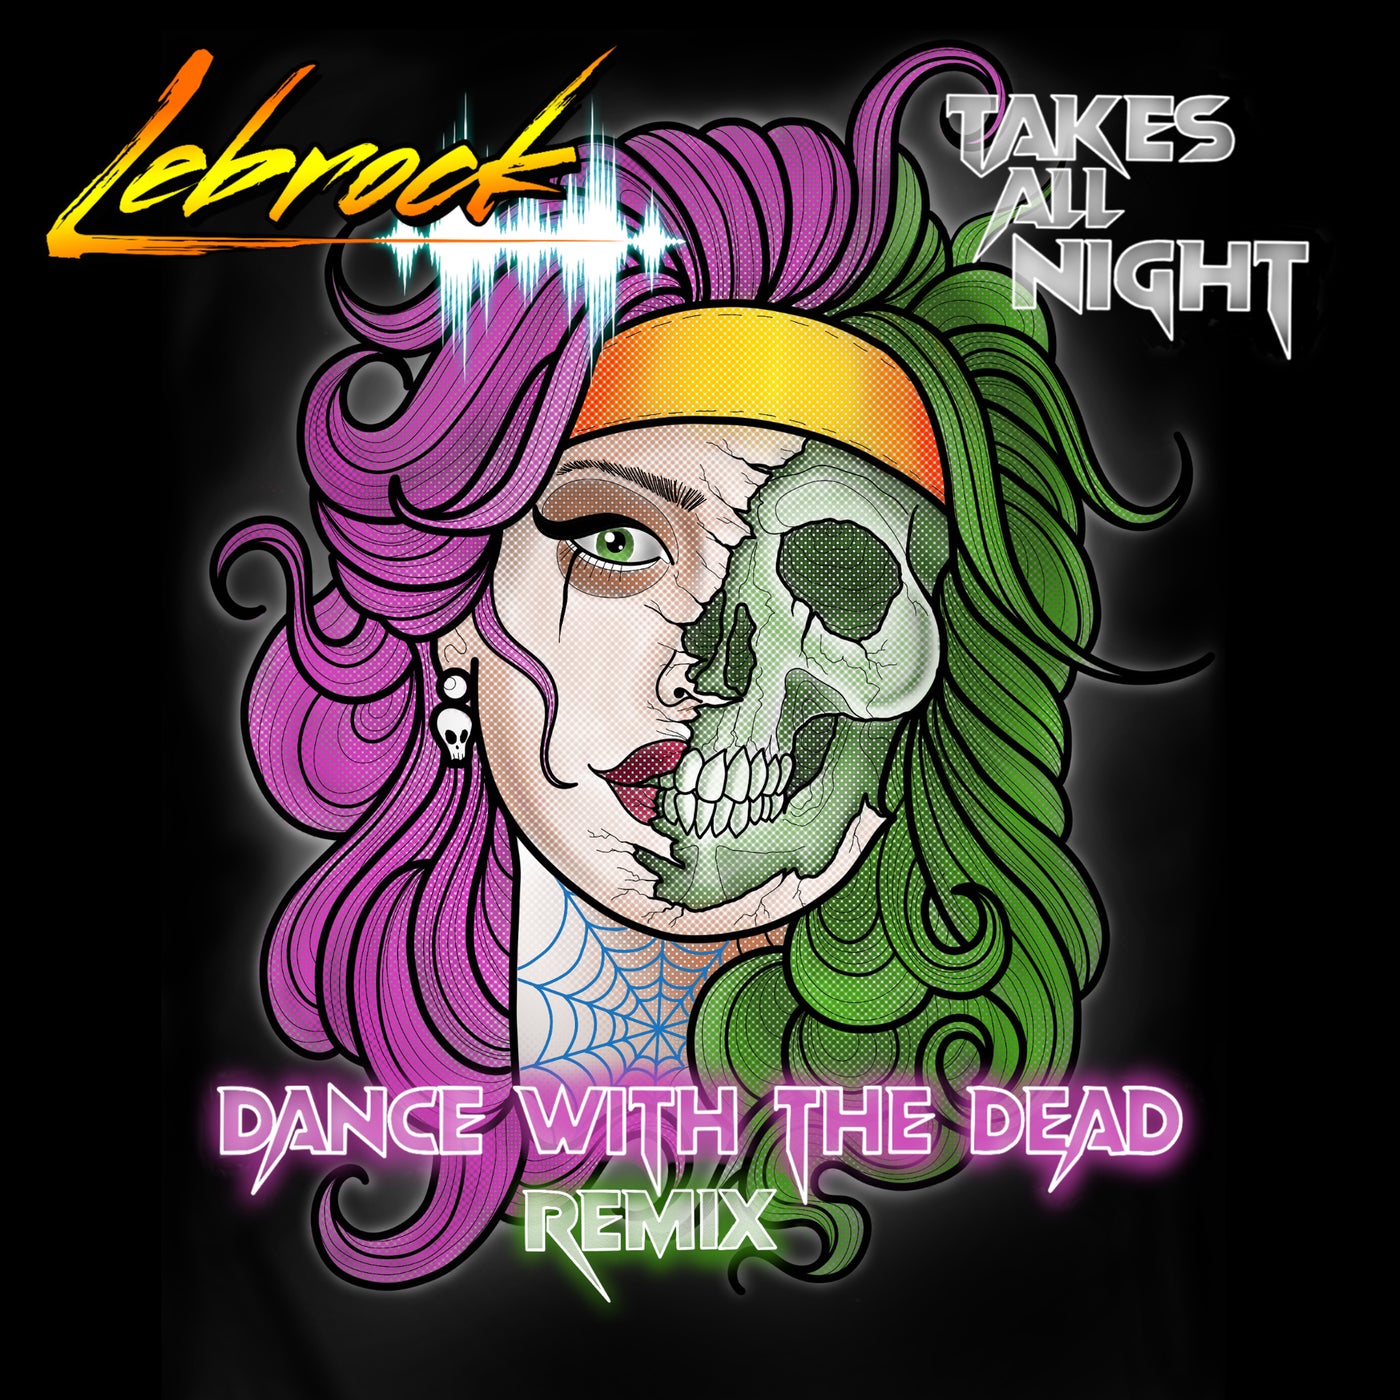 Takes All Night - Dance With The Dead Remix